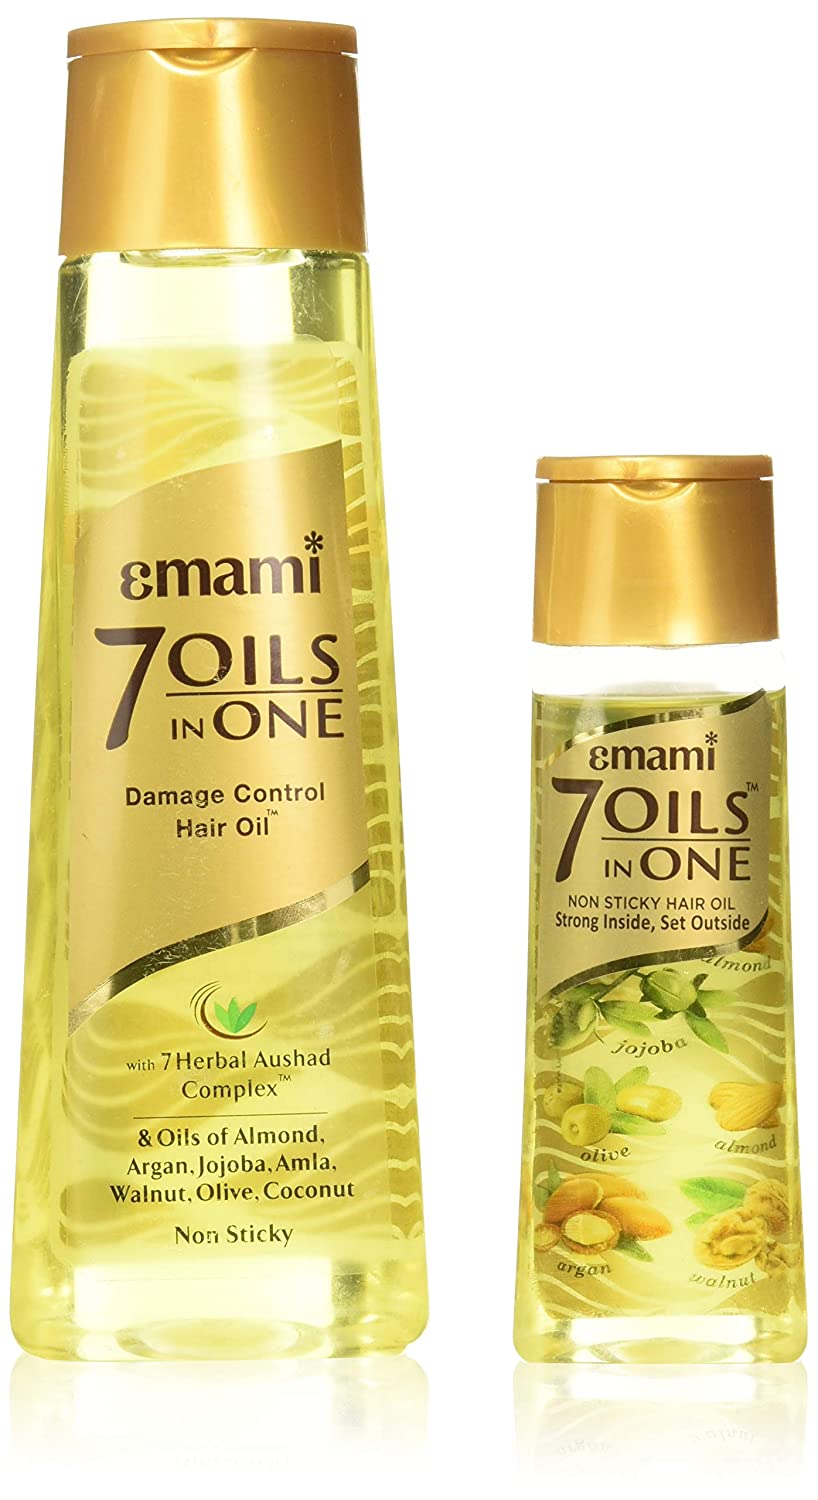 Emami 7 Oils In One, Non Sticky & Non Greasy Hair Oil with Goodness of Almond Oil, Coconut Oil, Argan Oil and Amla Oil - 300ml + 100ml, Emami 7 Oils In One, Non Sticky & Non Greasy Hair Oil with Goodness of Almond Oil, Coconut Oil, Argan Oil and Amla Oil 